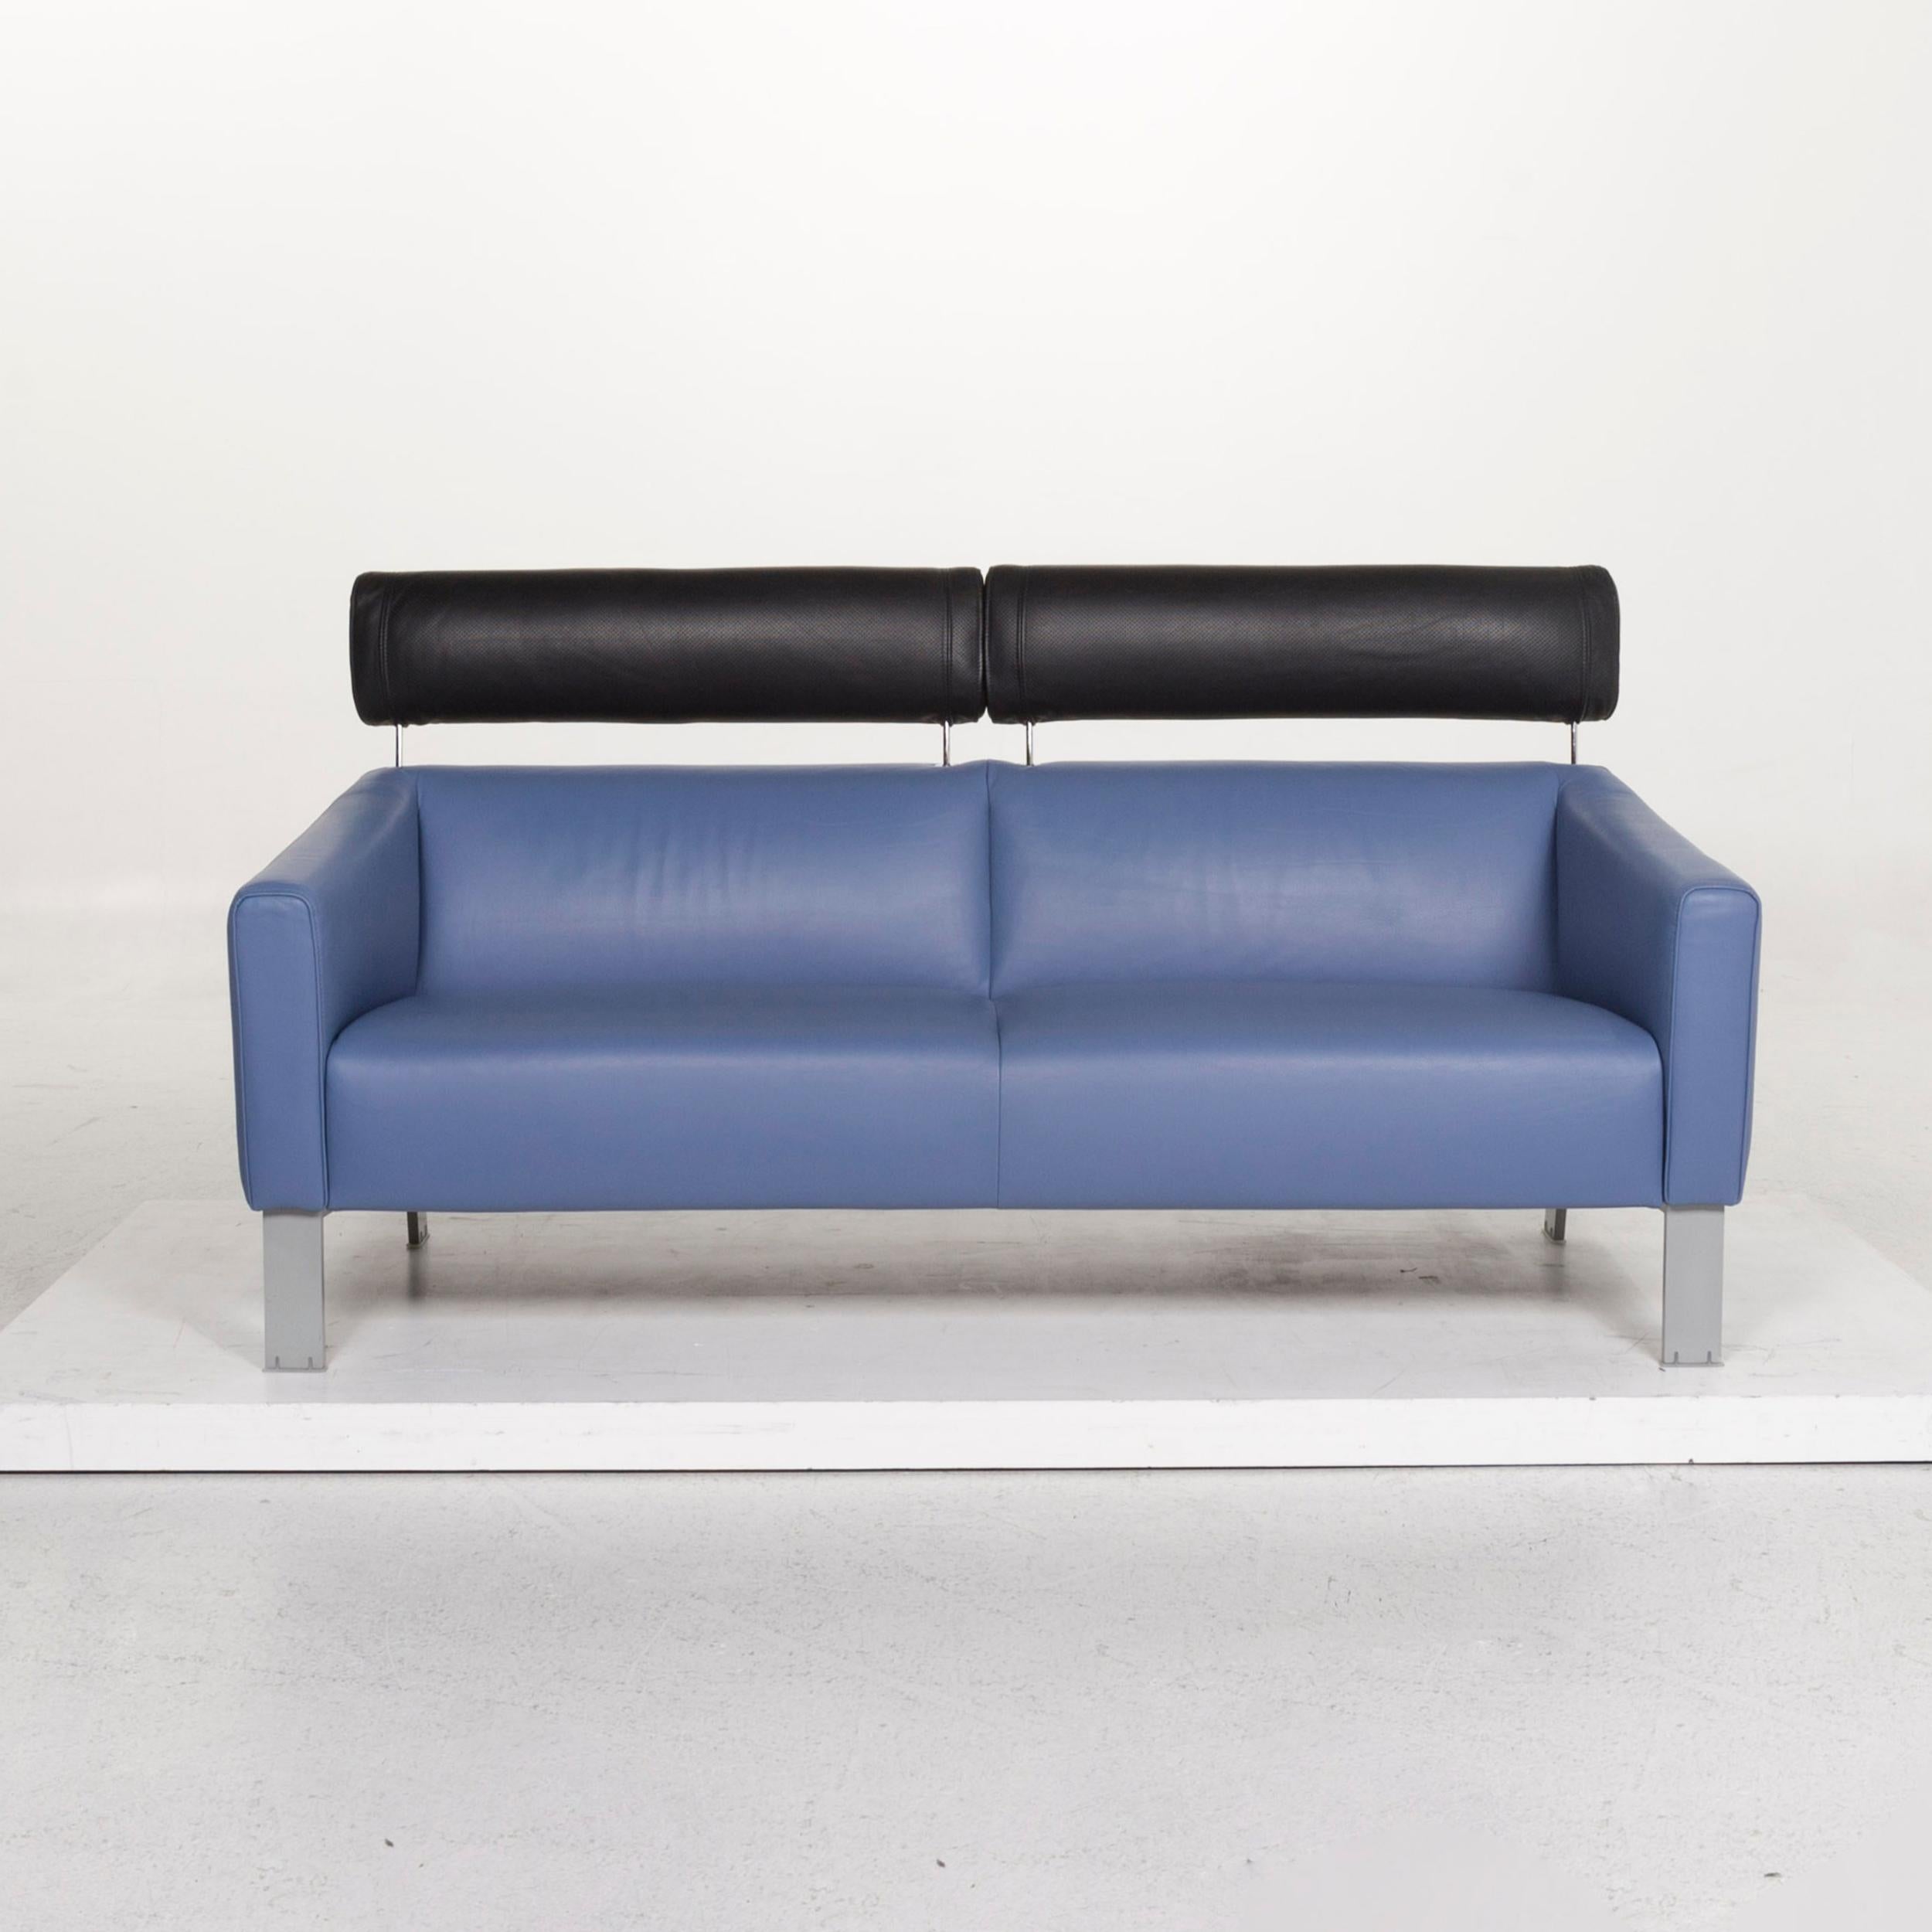 Leolux Leather Sofa Set Blue 1 Three-Seat 1 Two-Seat Couch In Good Condition For Sale In Cologne, DE